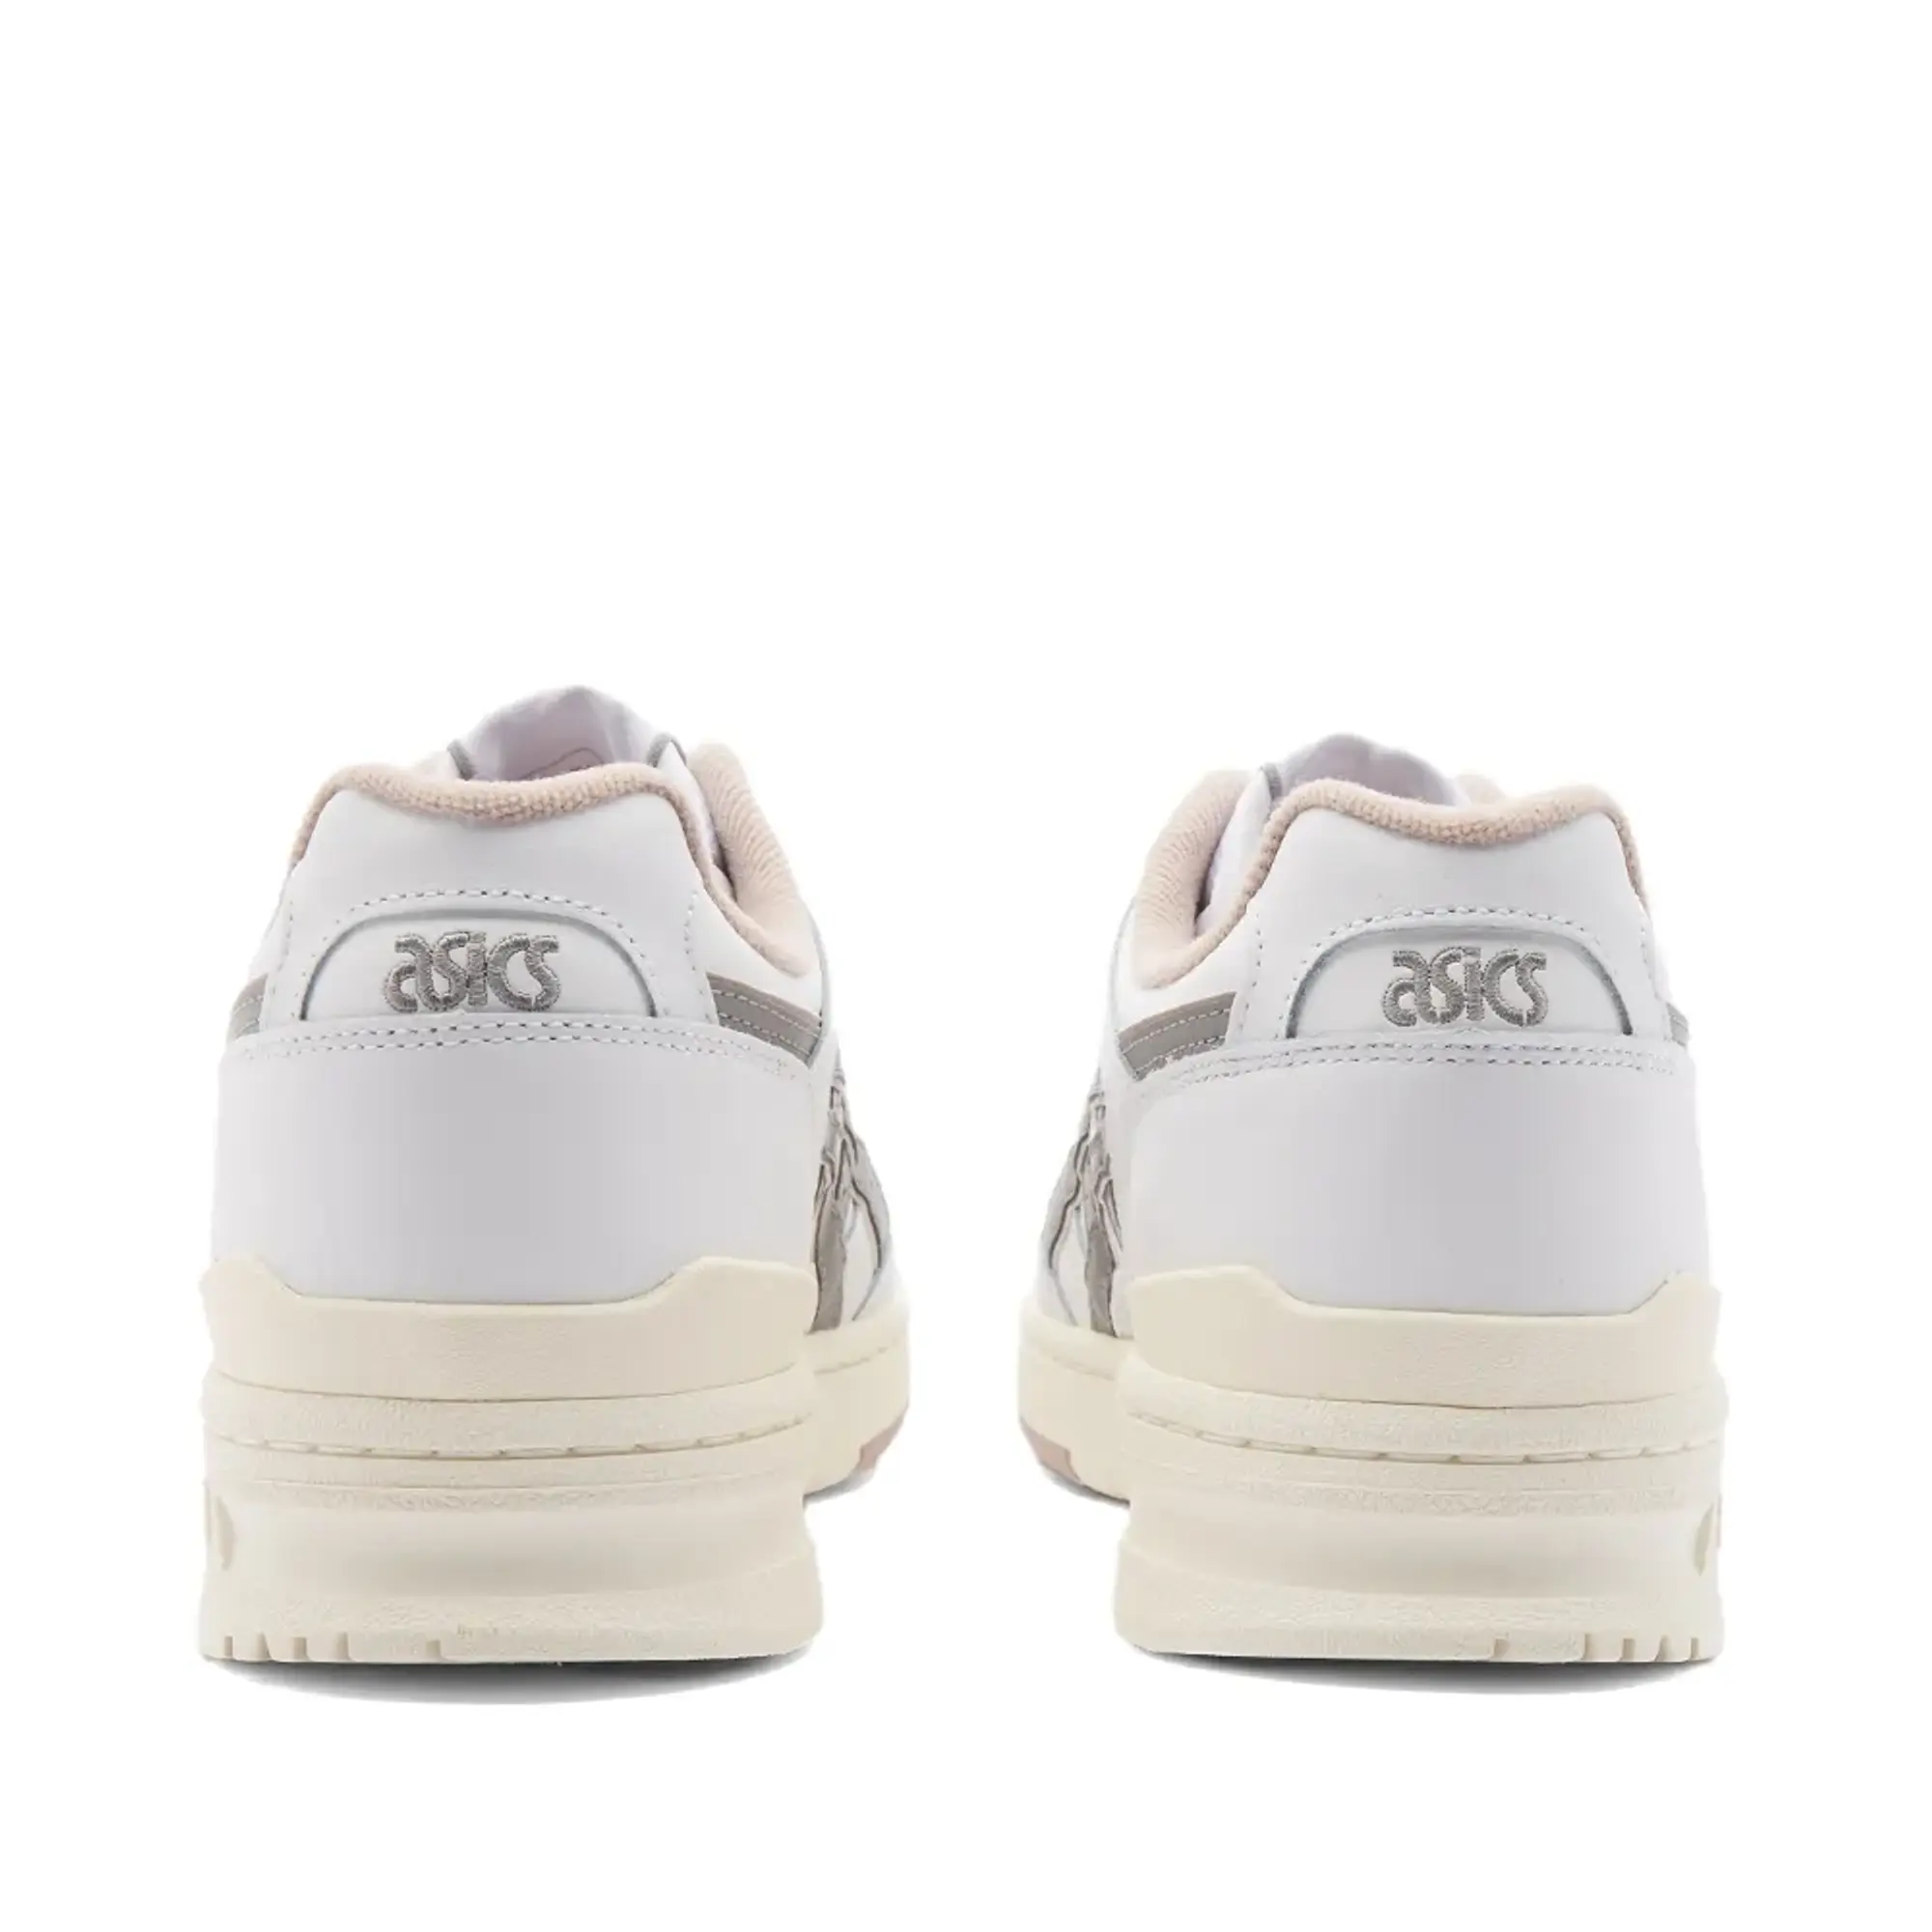 ASICS EX89 White / Clay Grey Shoes